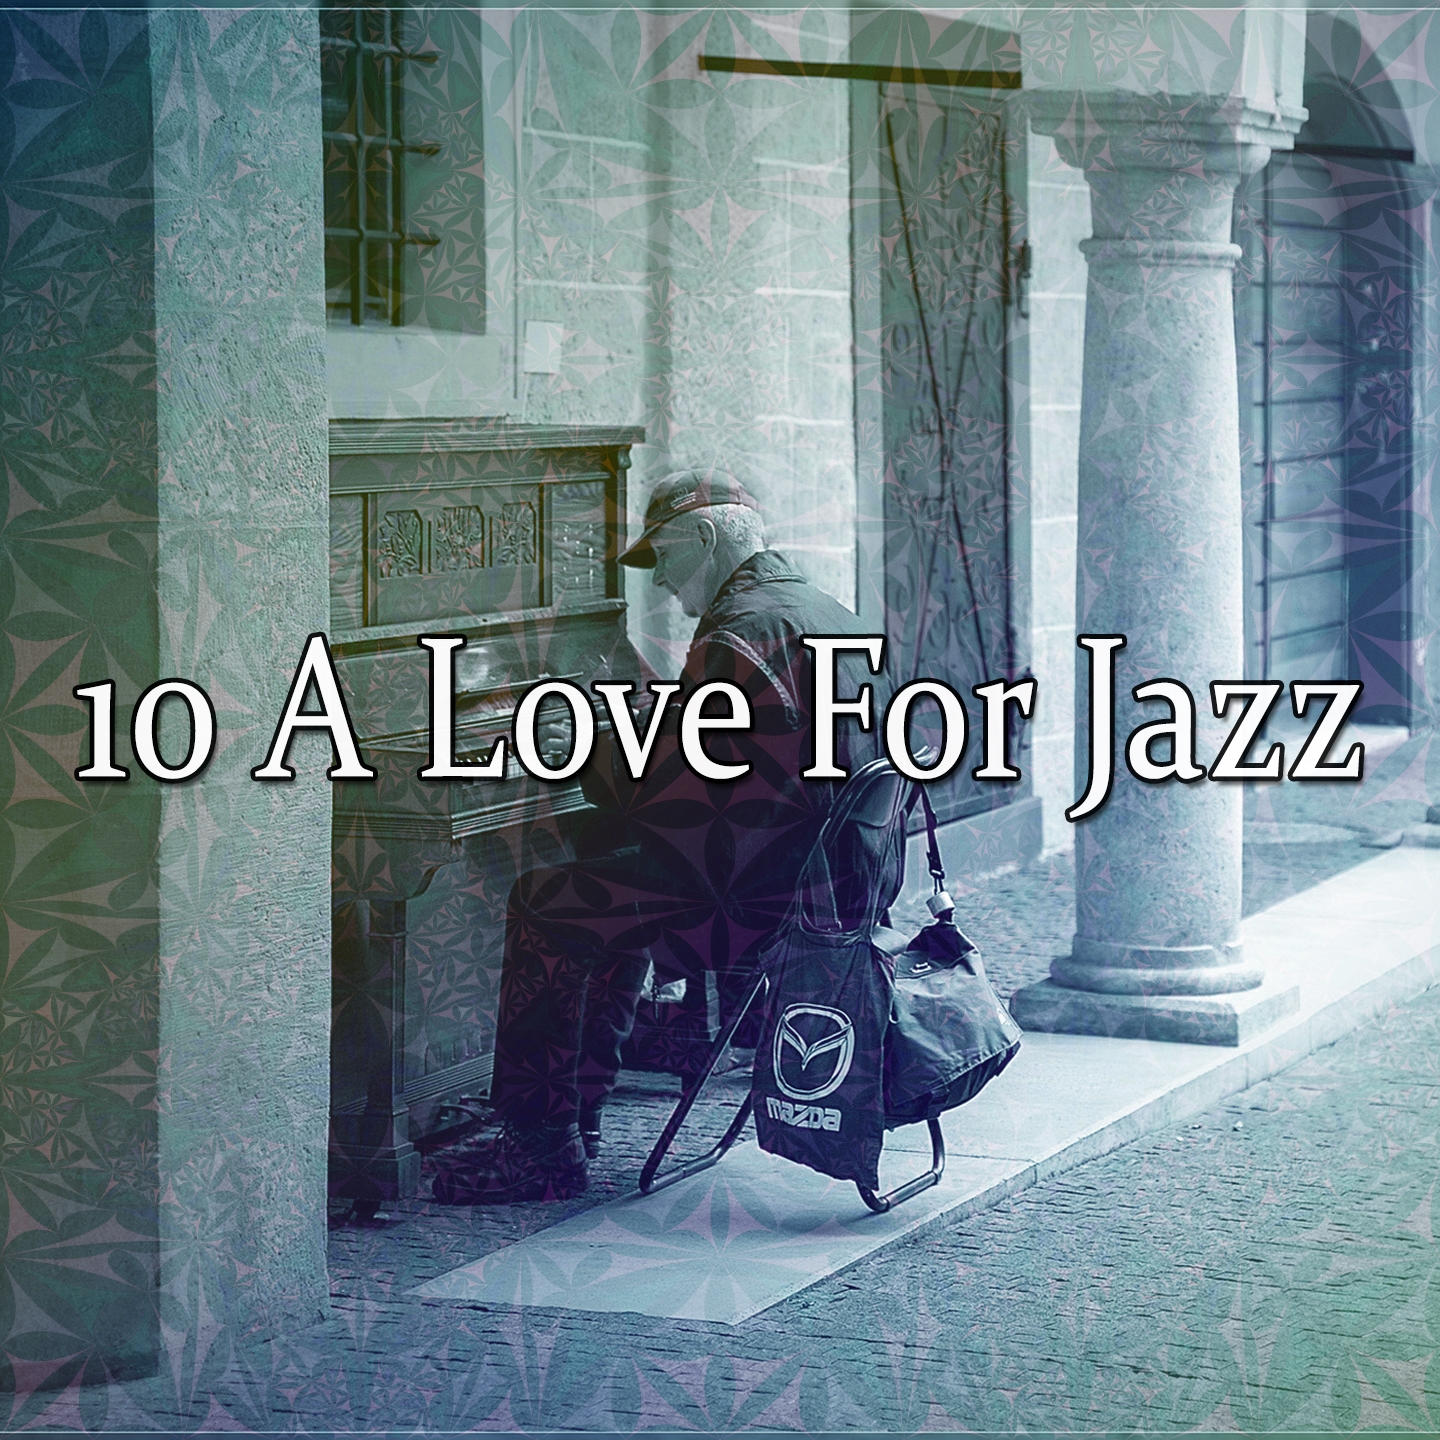 10 A Love For Jazz